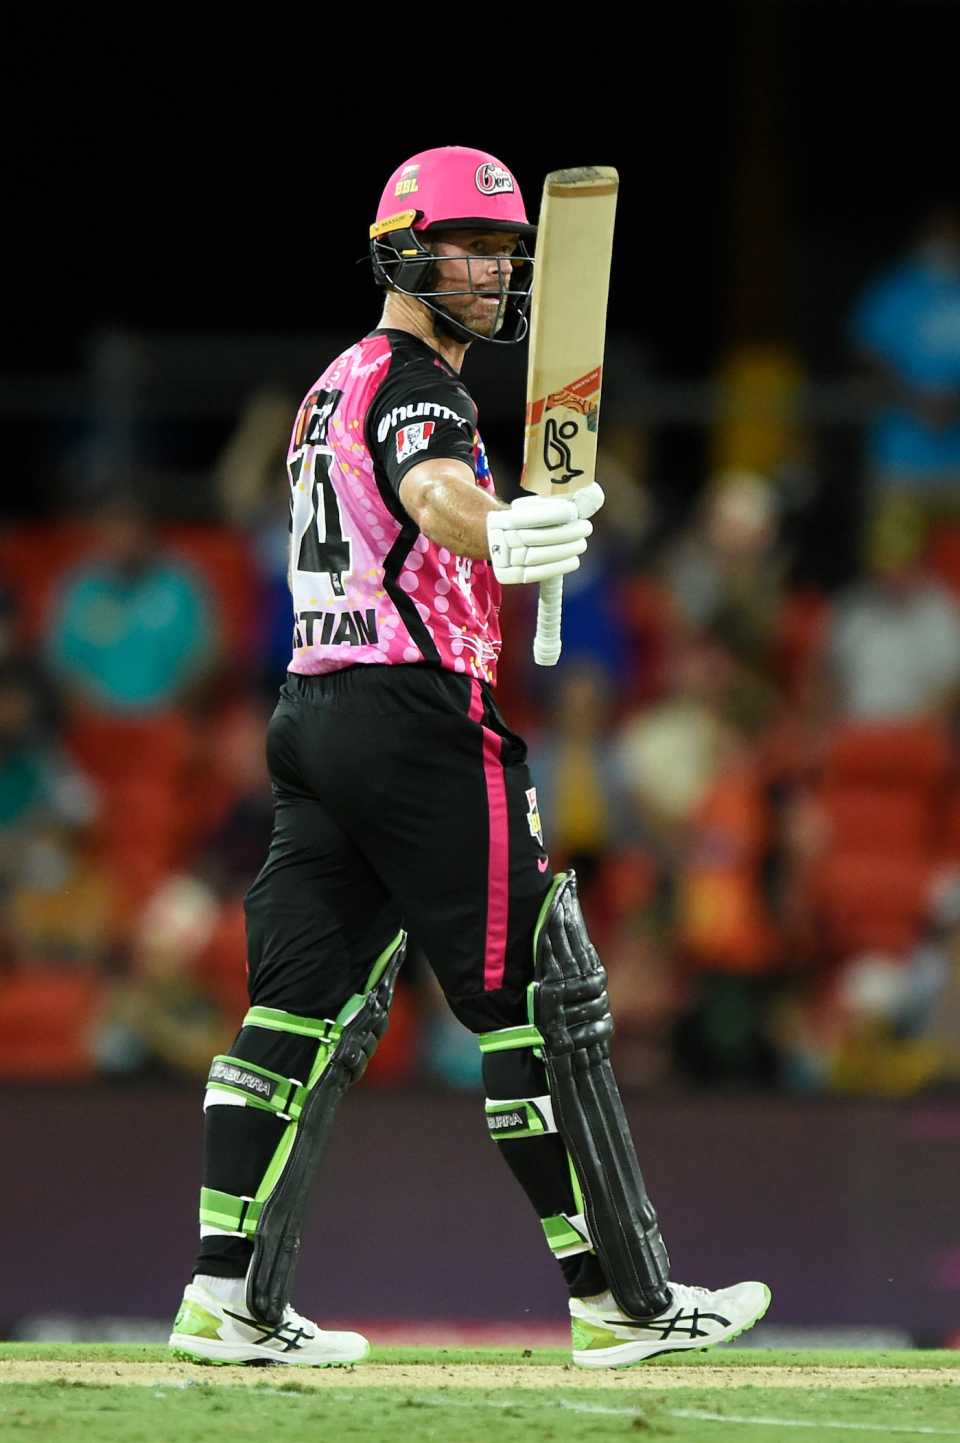 Dan Christian led the Sixers chase with a 61-ball 73, Perth Scorchers vs Sydney Sixers, BBL 2021-22, Carrara, January 4, 2022